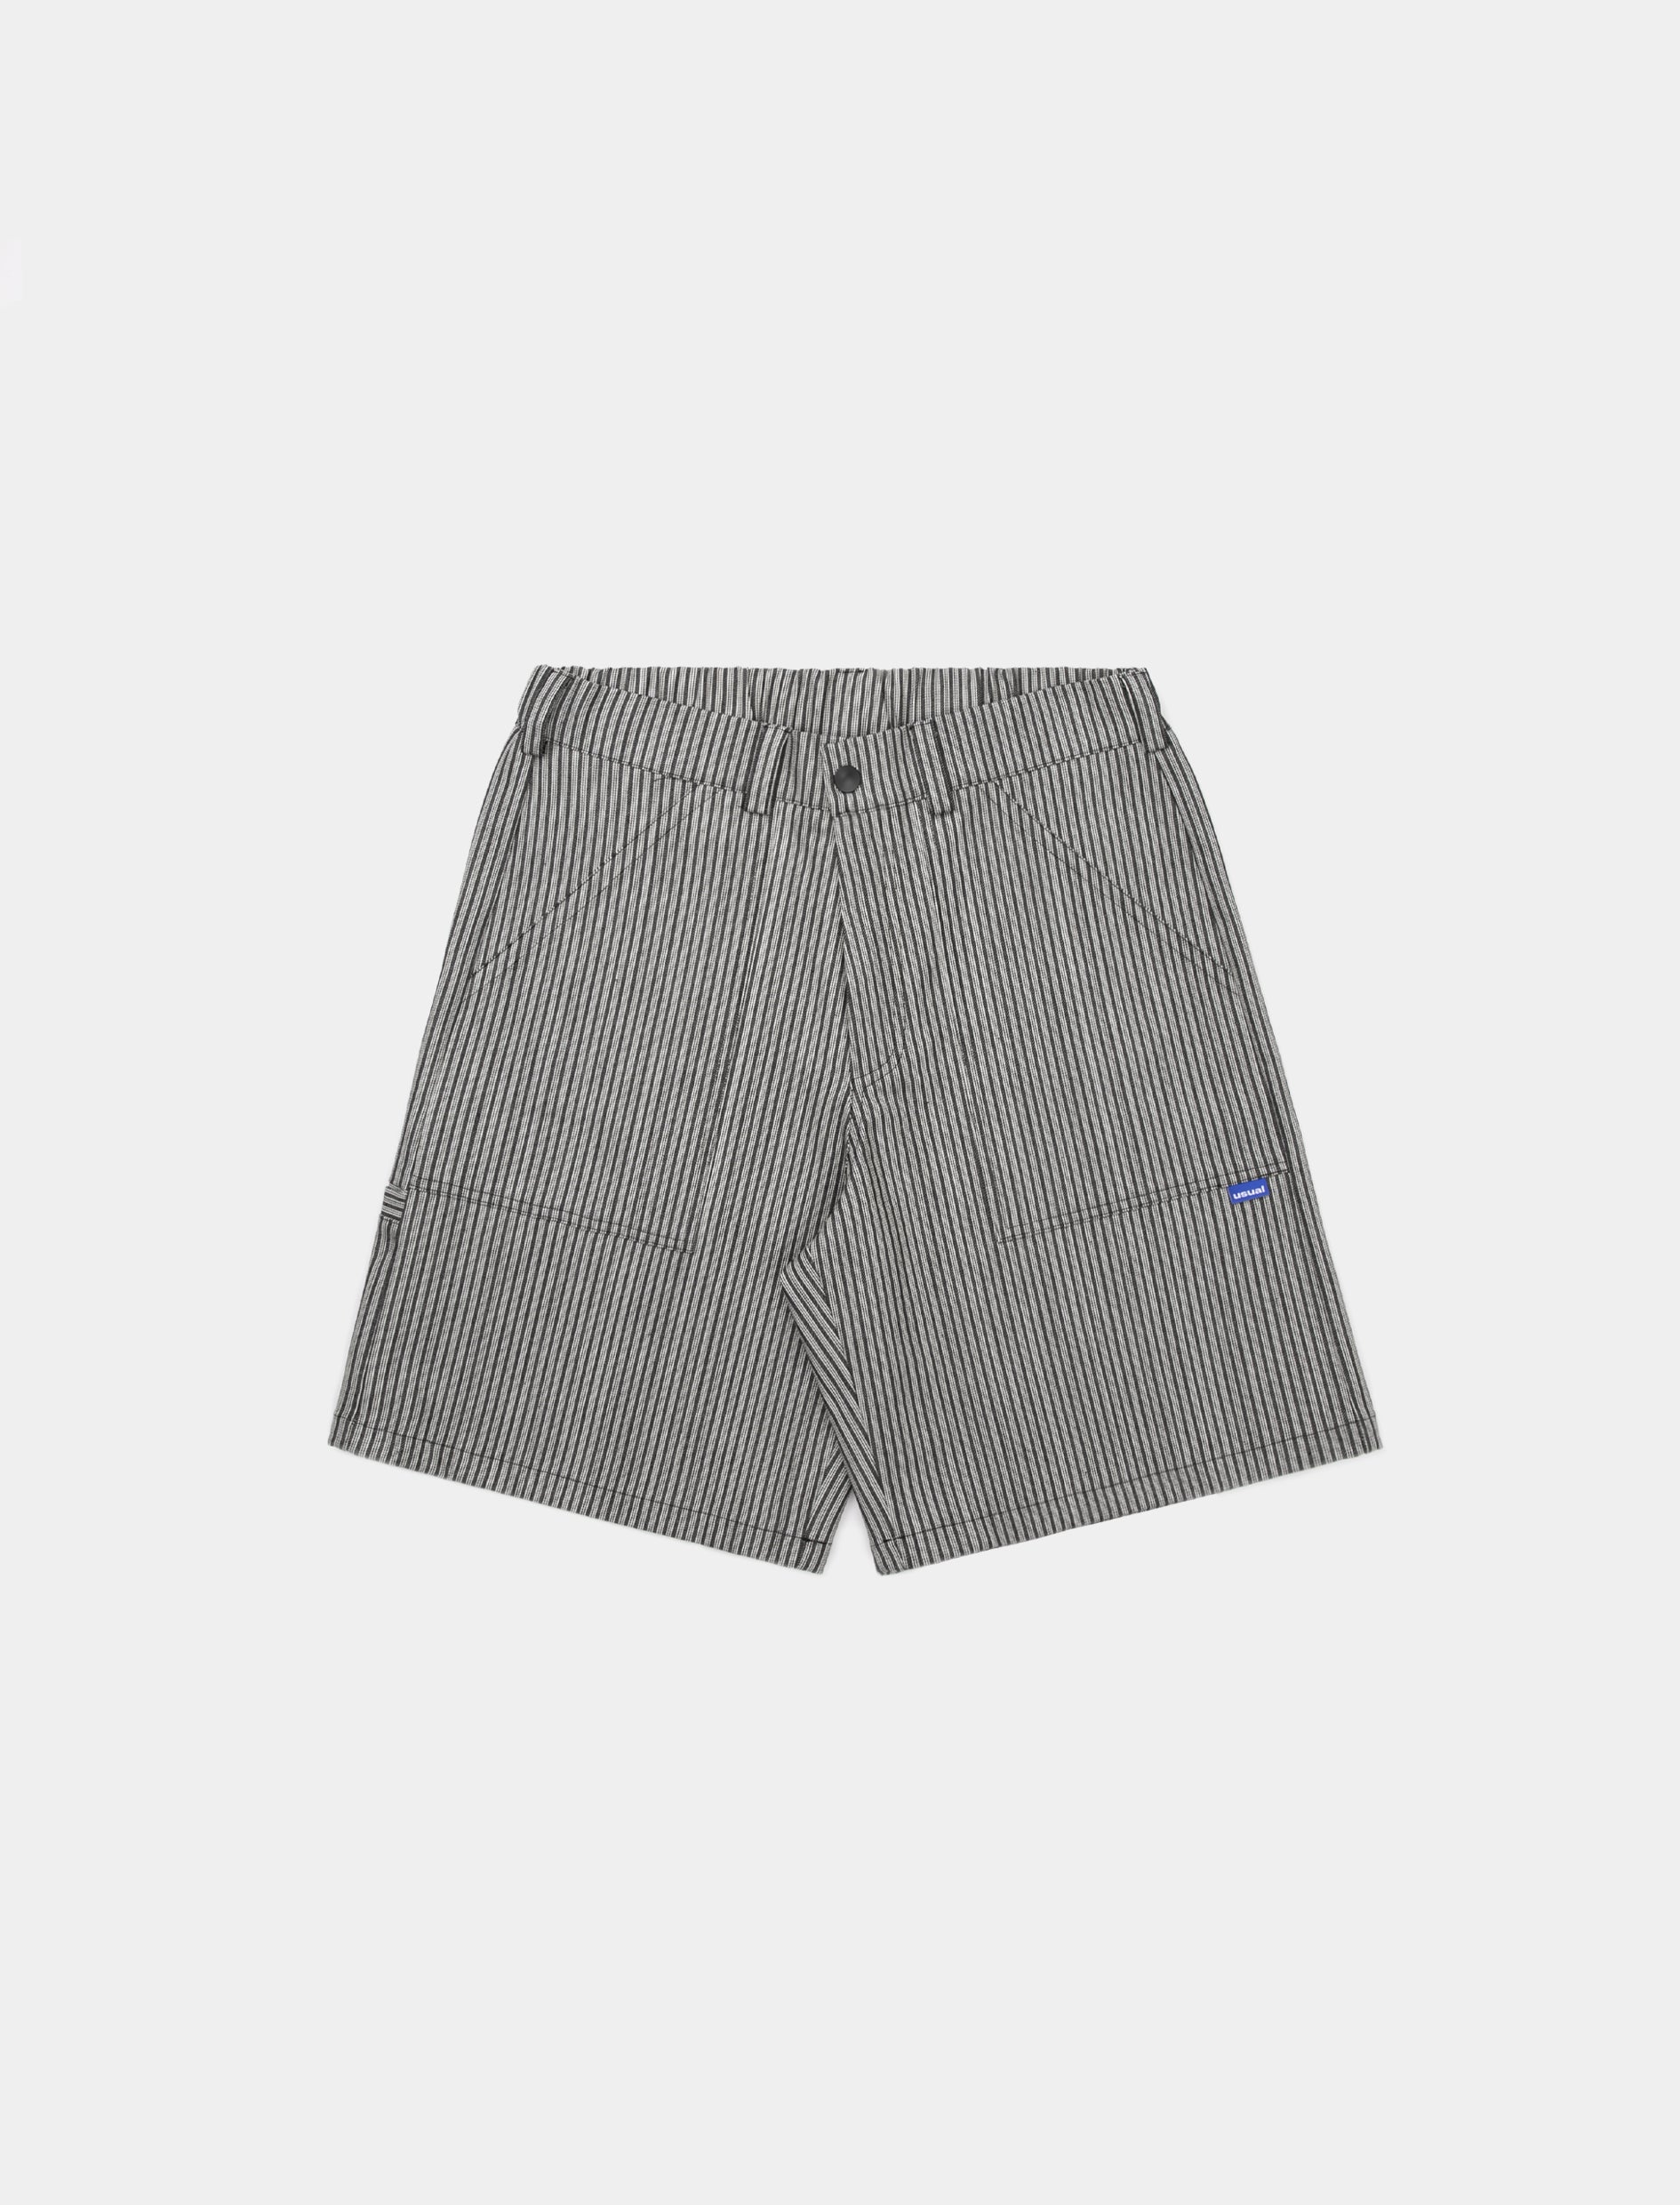 Baggy Fit Short Pants. Low rise. 100% Cotton. Elastic waist on back. Button and zip. Made in Italy.